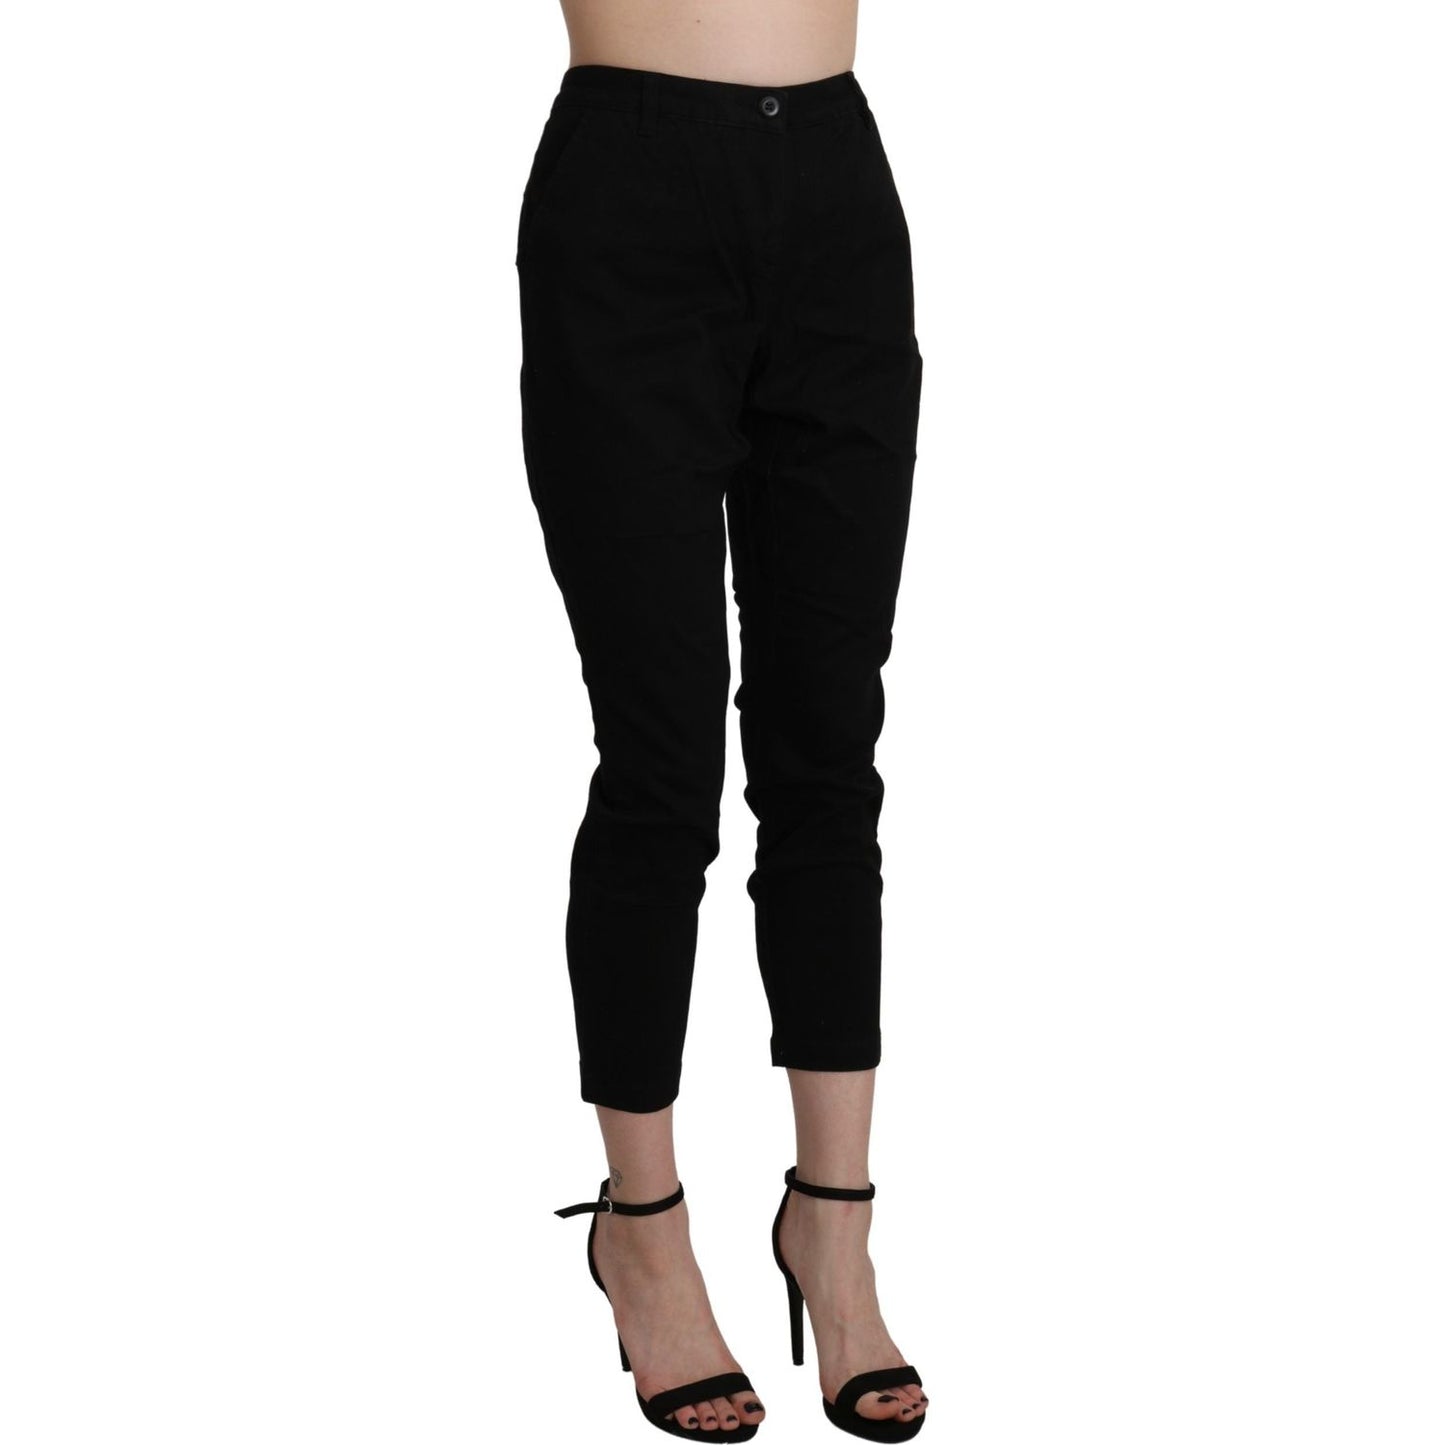 Acht Chic High Waist Cropped Black Jeans Jeans & Pants black-high-waist-skinny-cropped-cotton-capri-pant